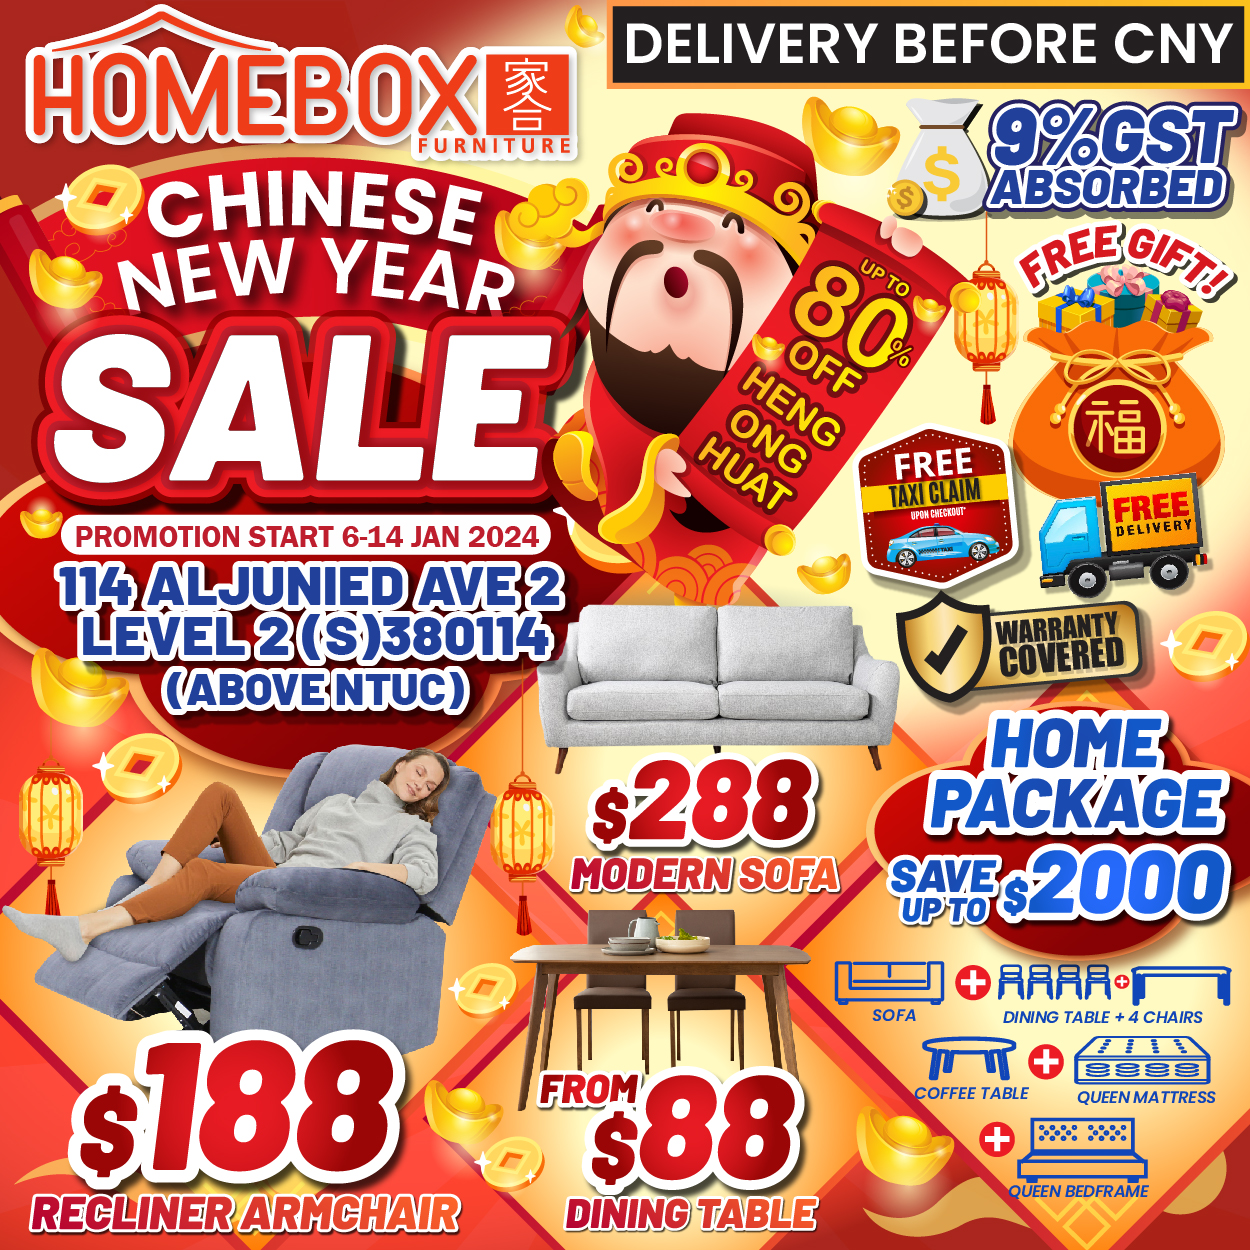 Lobang: Over 7,000 furniture to clear at this festive CNY Sale at Homebox Furniture @ Aljunied from now till 14 Jan 24; up to 80% off and guaranteed delivery before CNY - 3